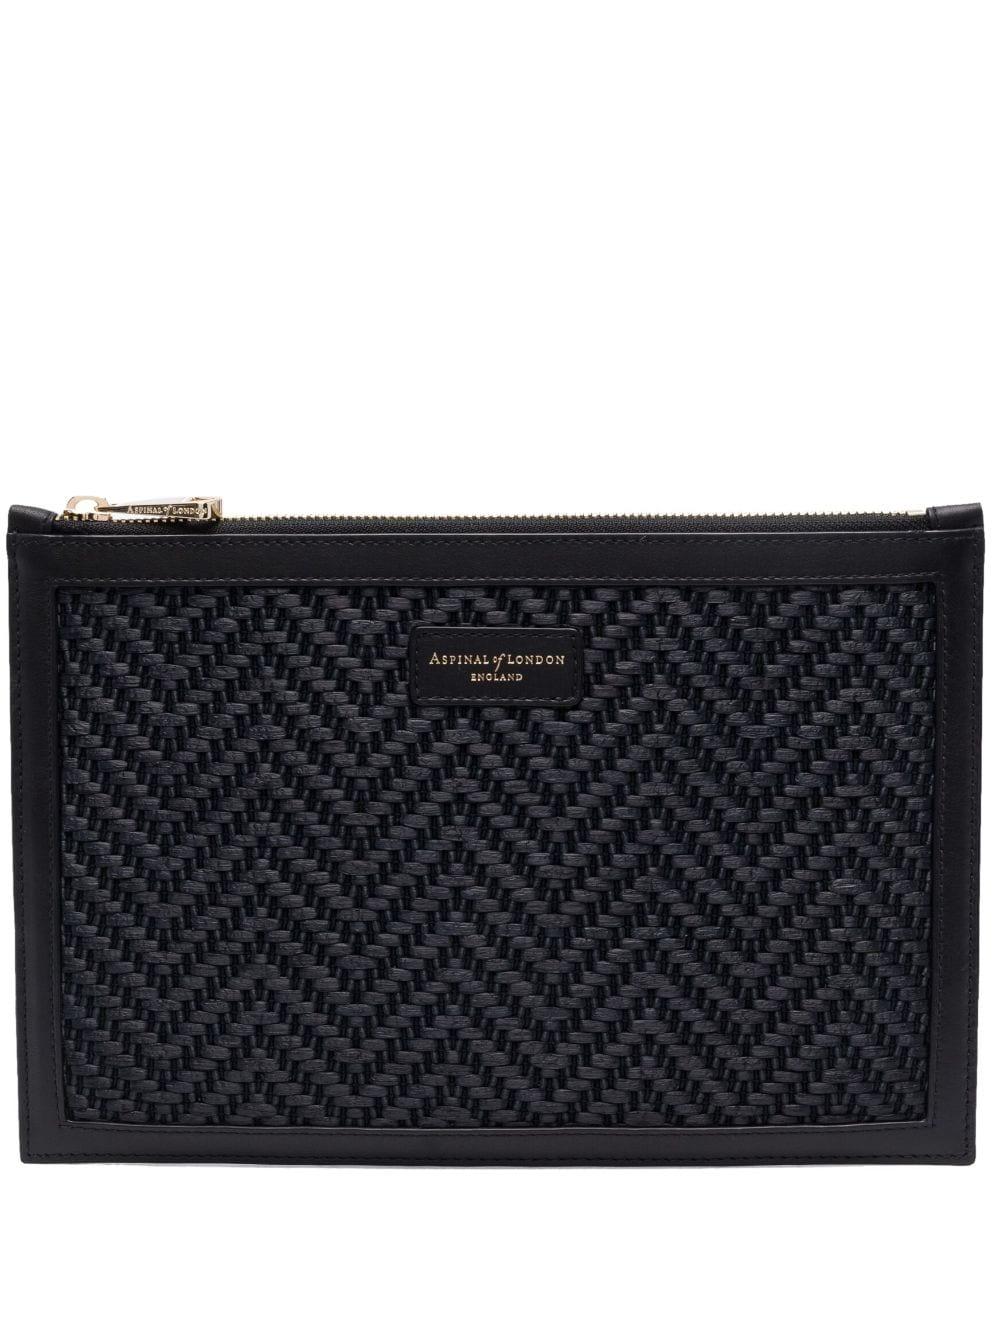 Aspinal Of London Large Leather make-up Bag - Farfetch